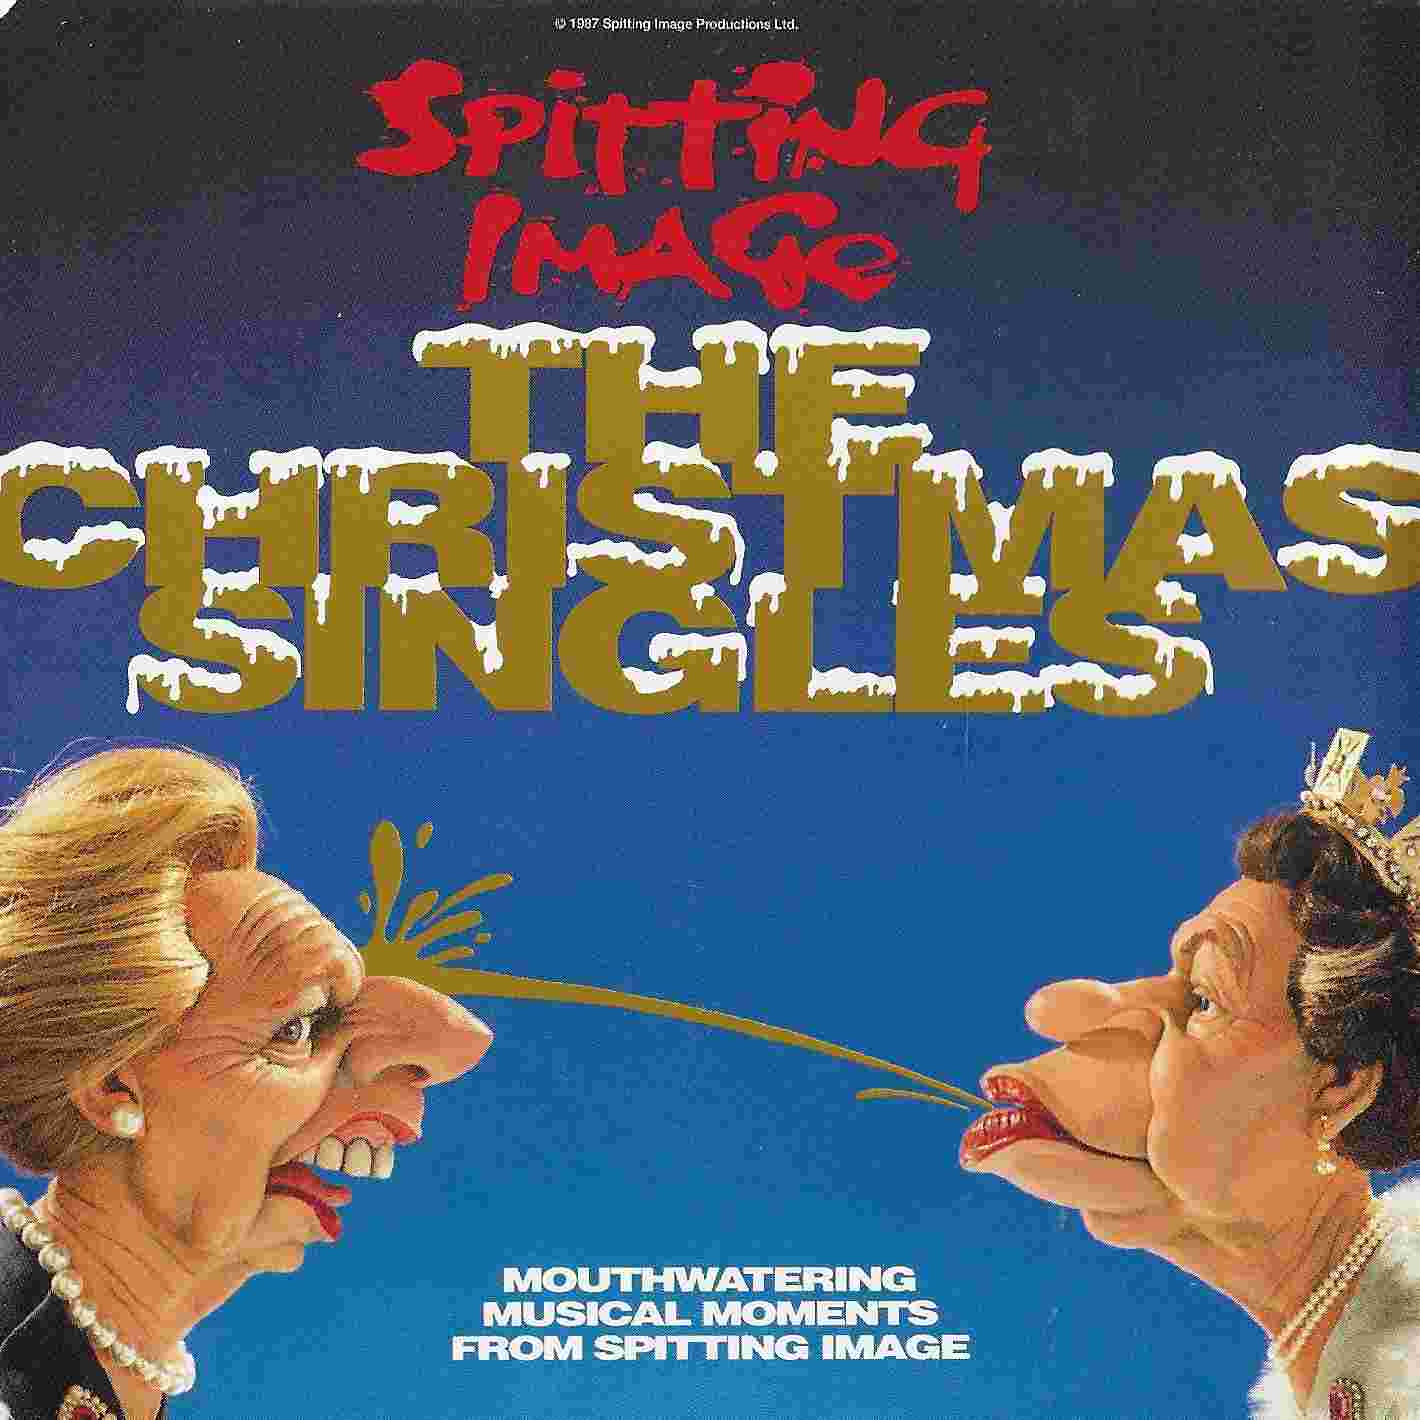 Picture of The Christmas singles by artist Steve Brown / Philip Pope / James Simpson from ITV, Channel 4 and Channel 5 cdsingles library